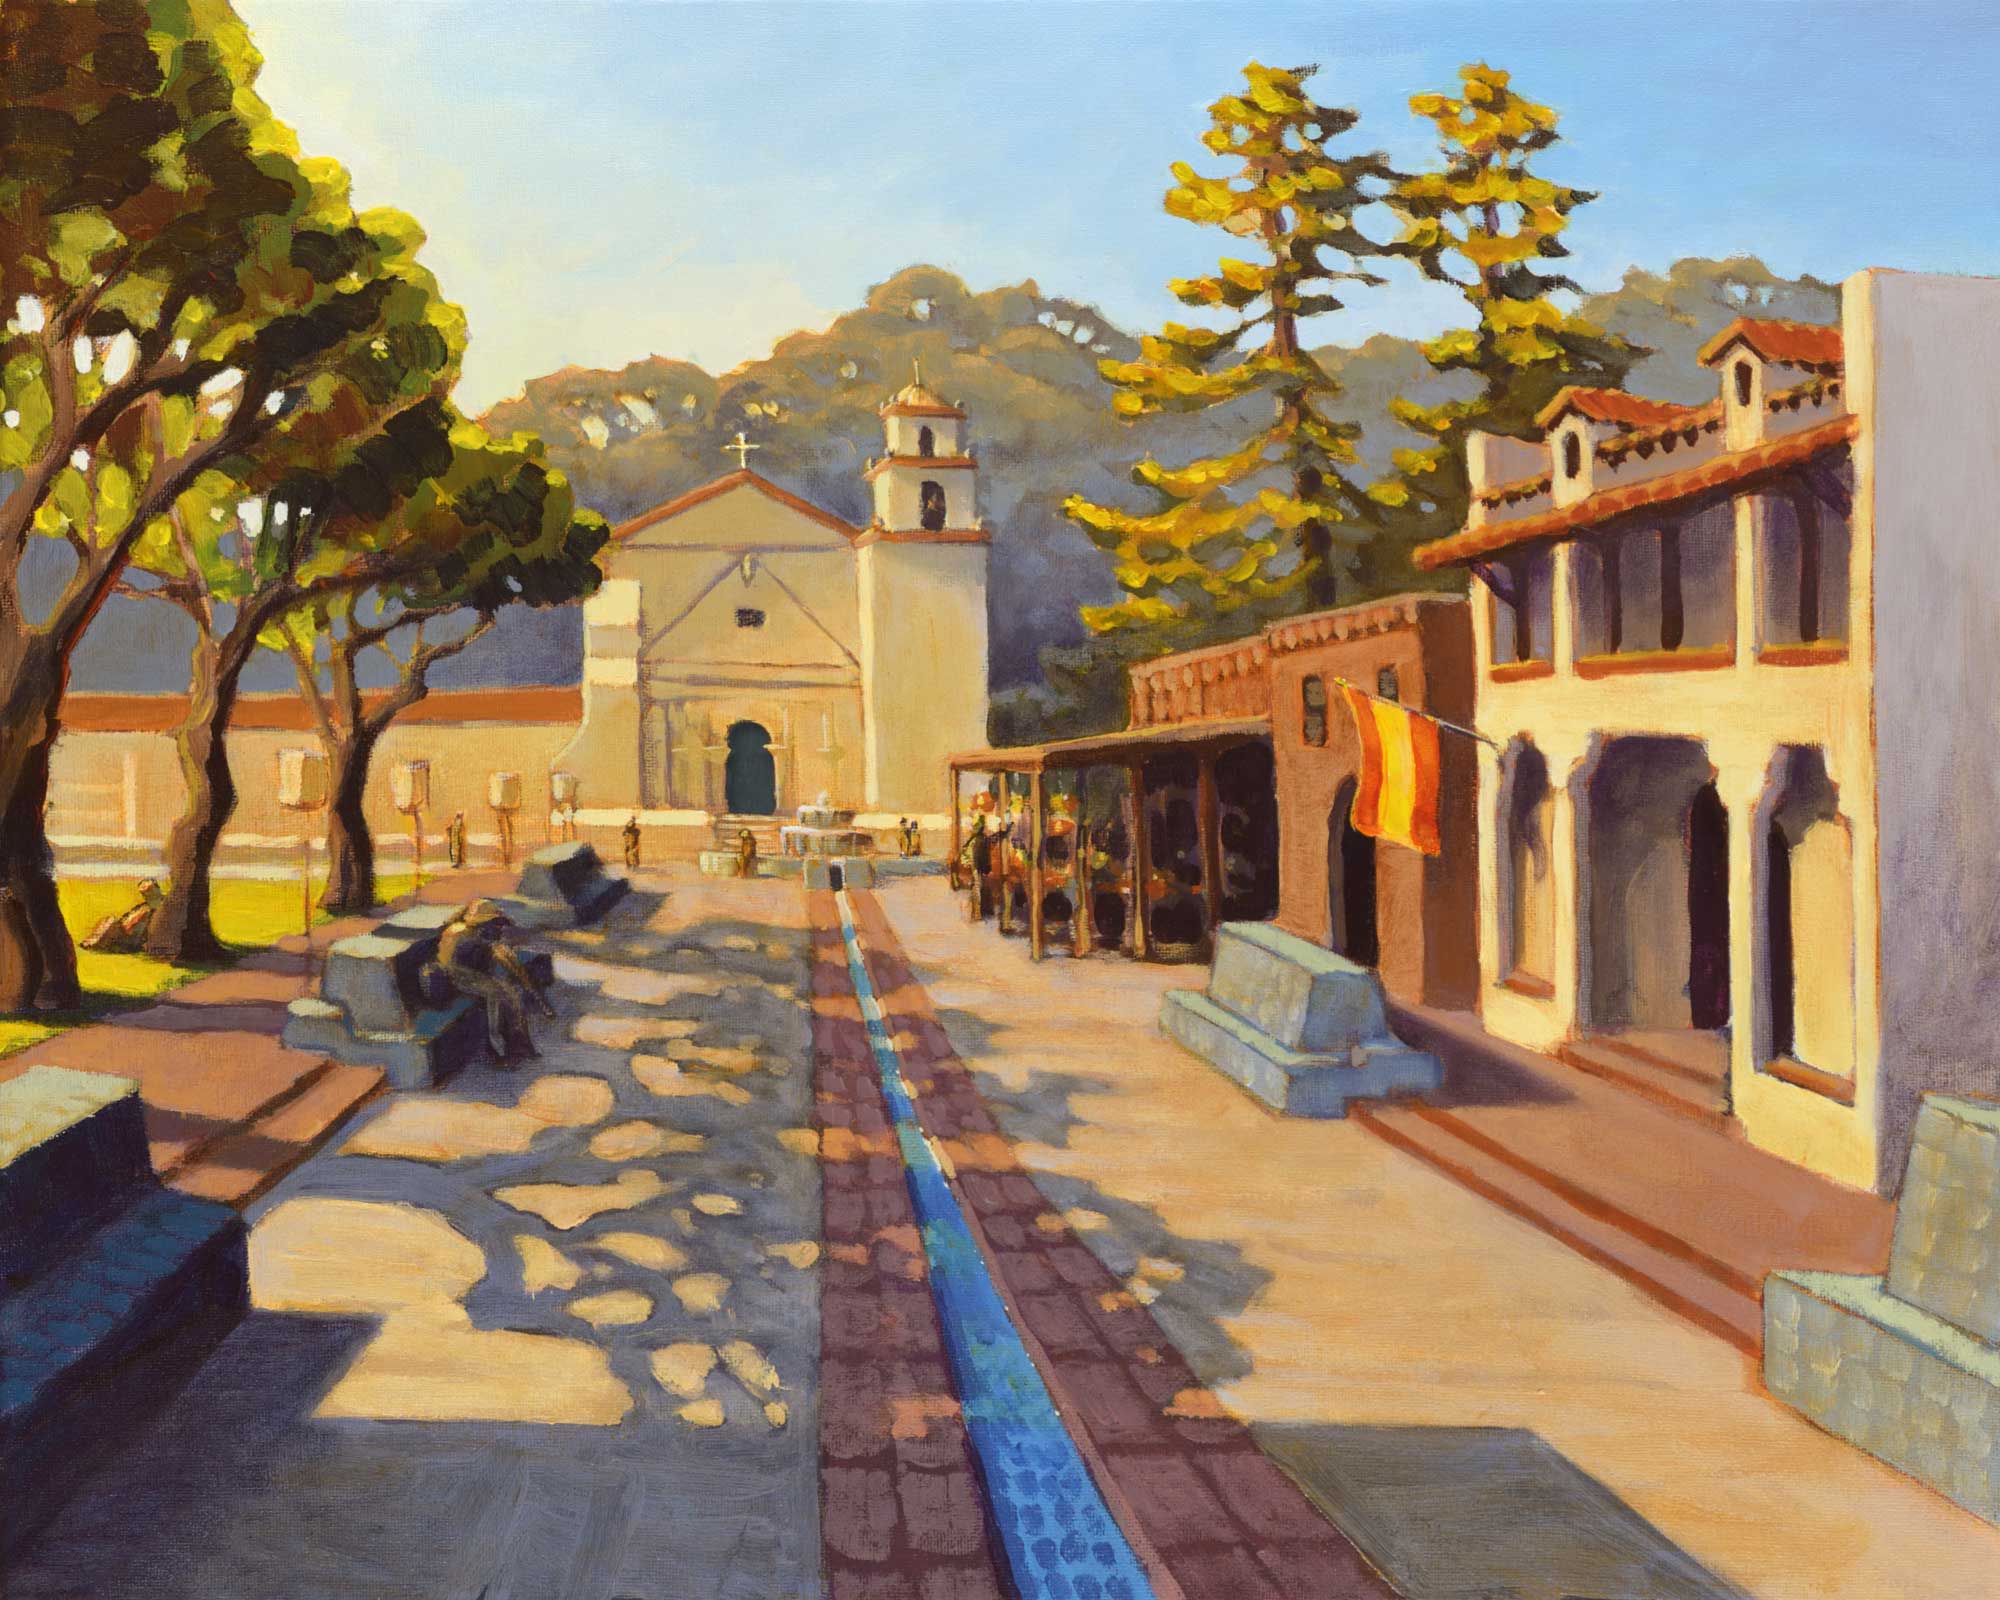 A plein air painting of the Ventura Mission and aqueduct fountain on the Southern California coast